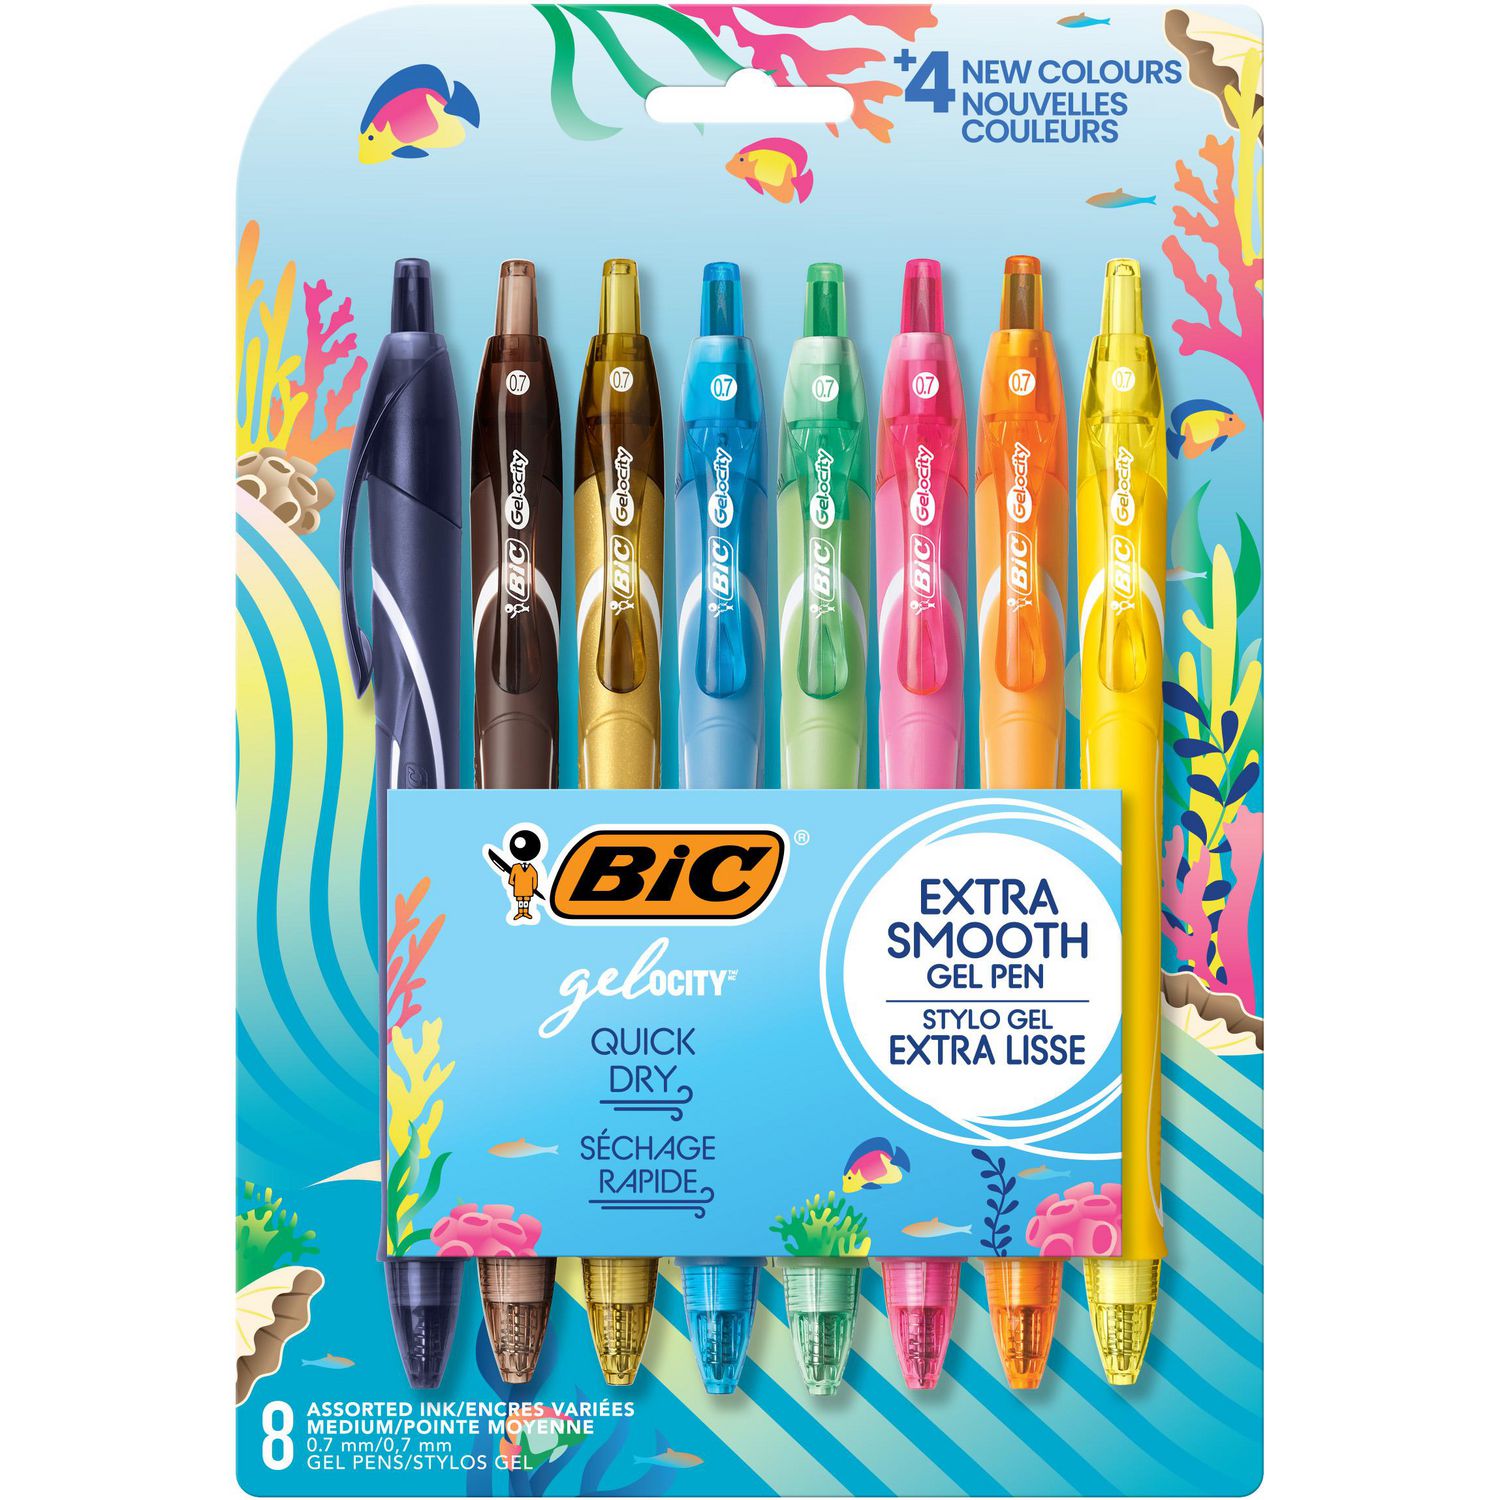 BIC Gel-ocity Quick Dry Special Edition Fashion Gel Pen, Medium Point  (0.7mm), Assorted Colours, For a Smooth Writing Experience, 8-Count, 8-Count